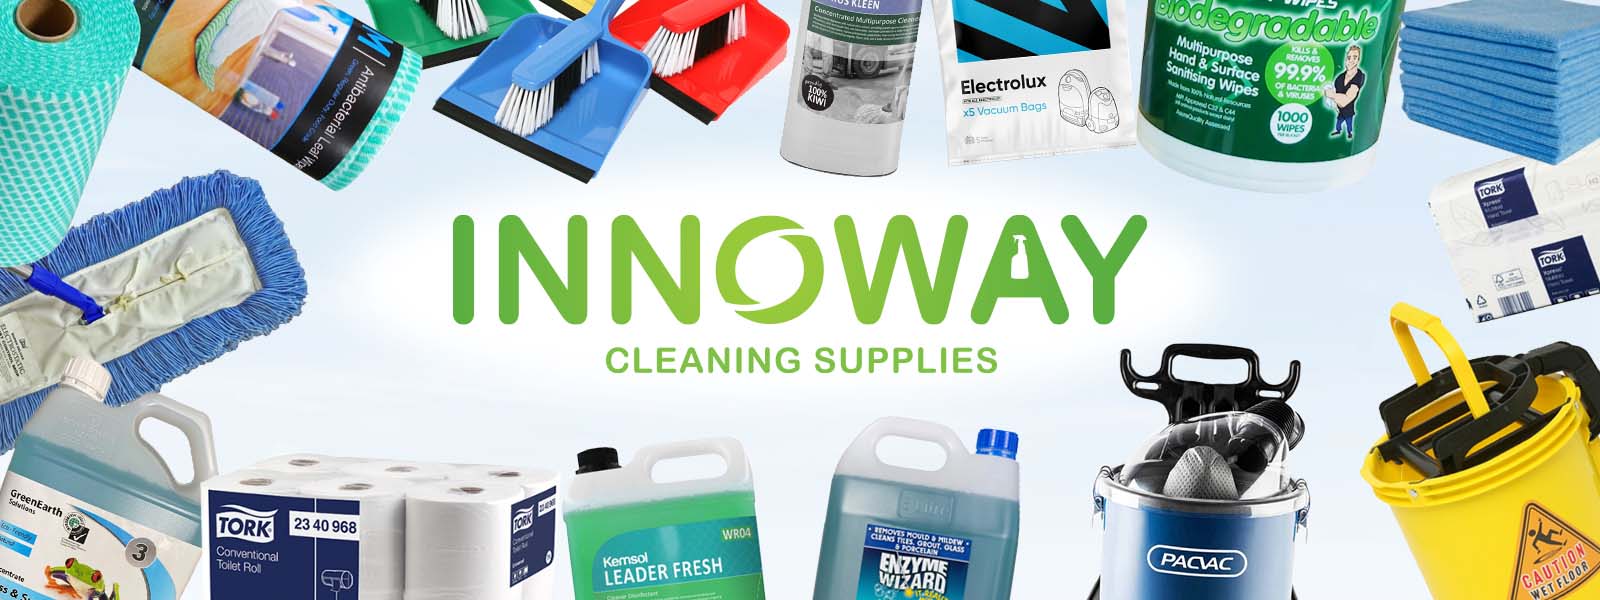 About Innoway Cleaning Supplies